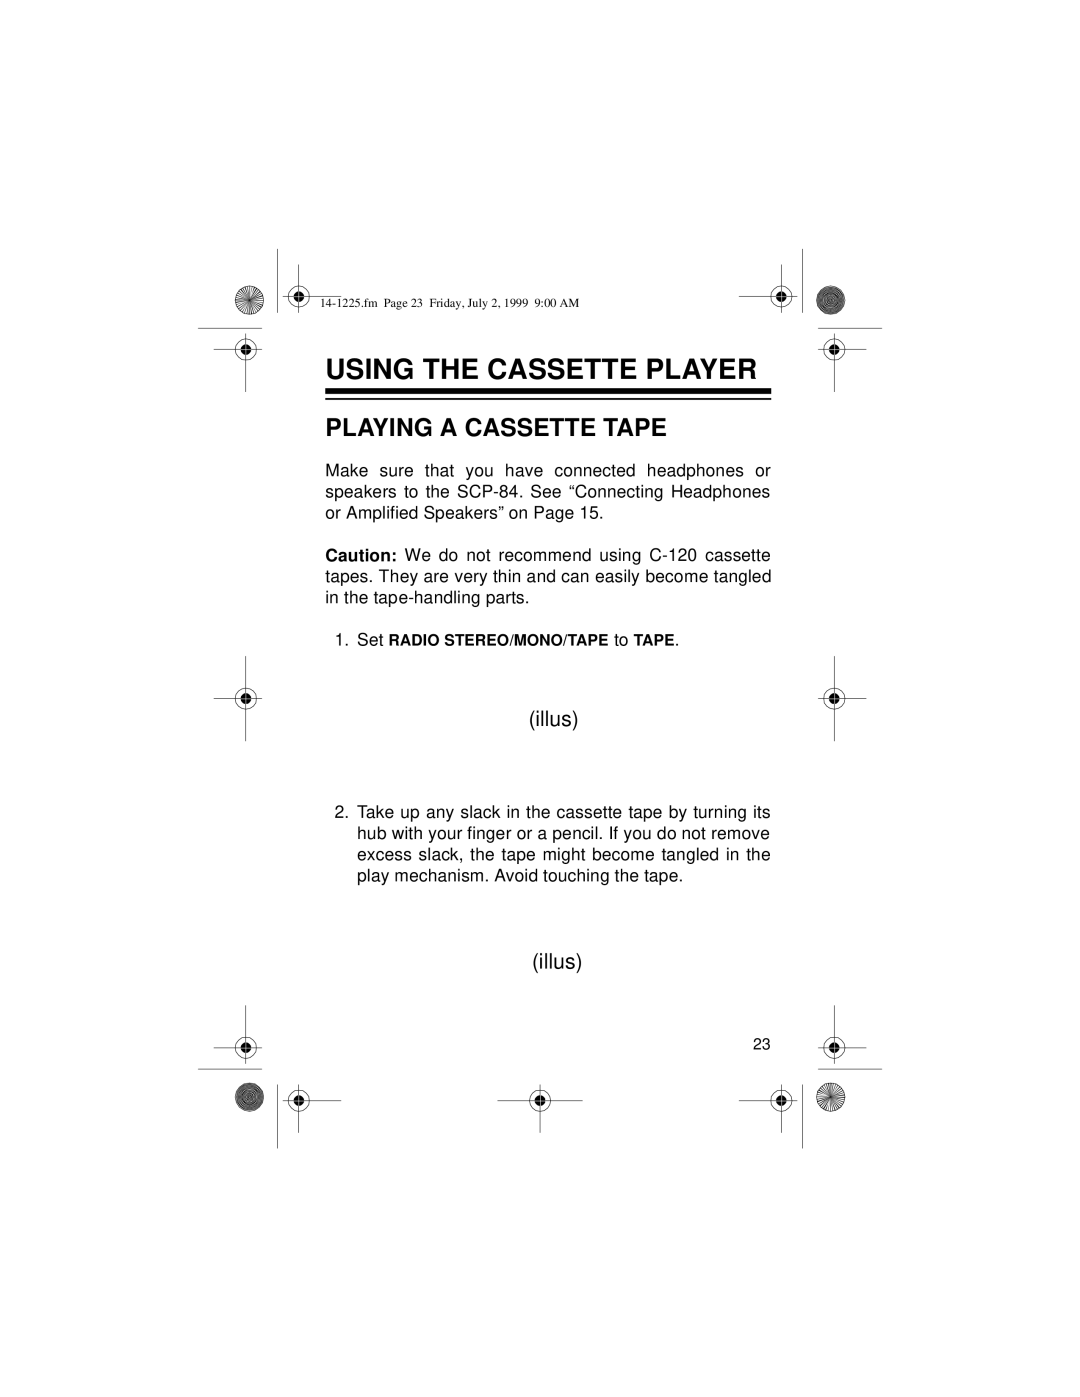 Optimus SCP-84 owner manual Using The Cassette Player, Playing A Cassette Tape, illus 